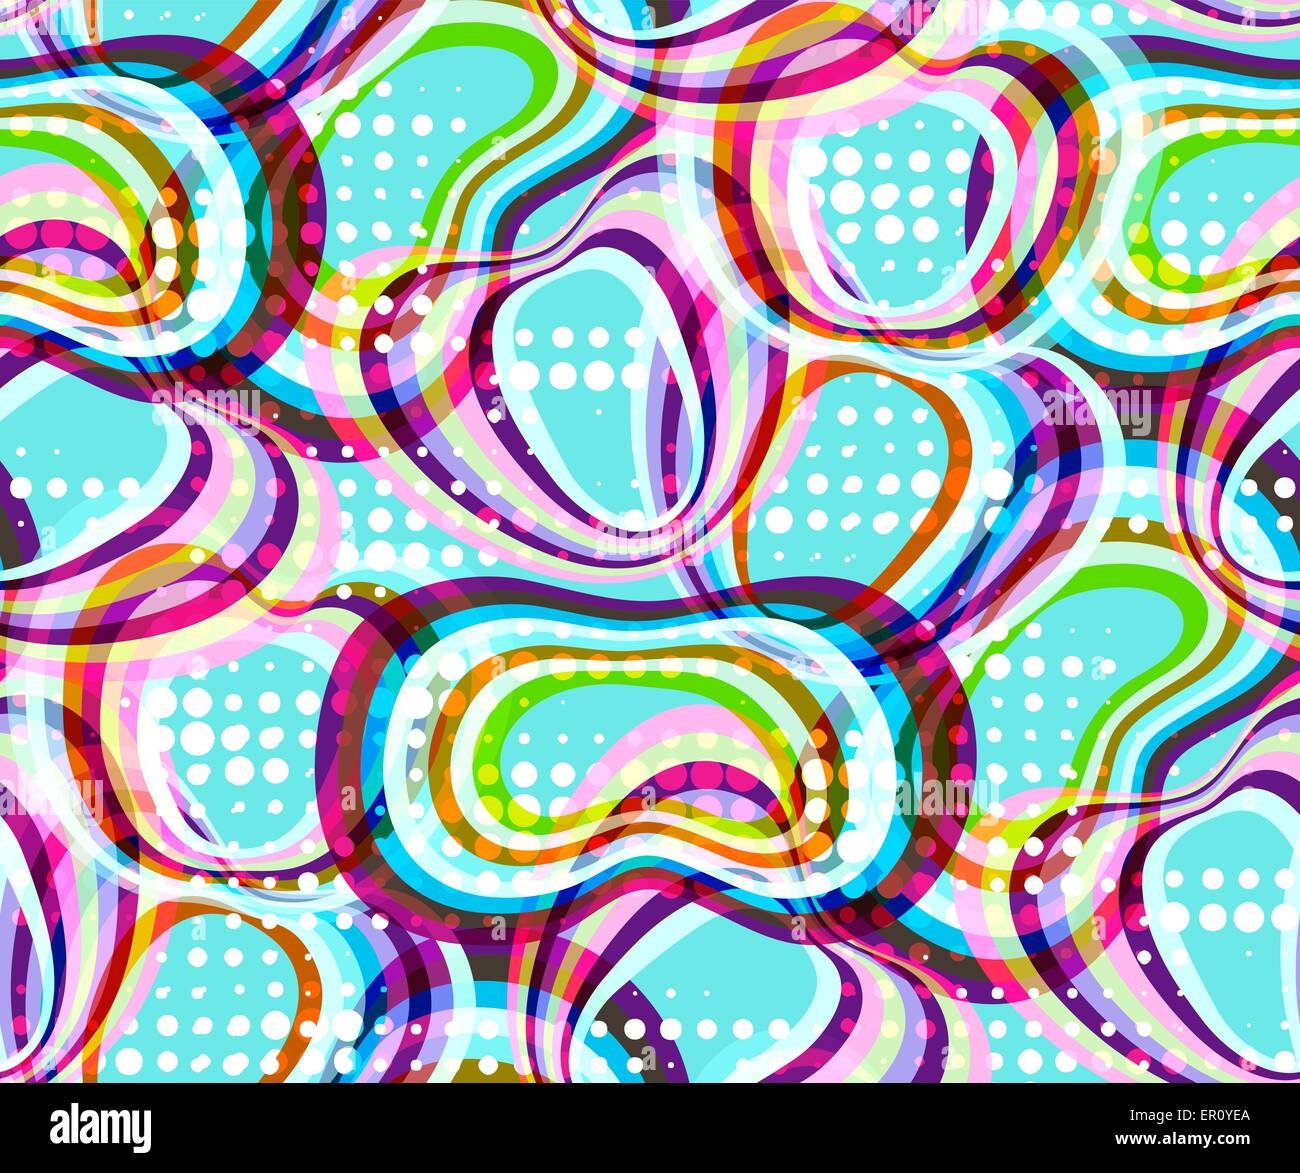 Abstract seamless pattern. Geometrical motifs, bright colors. Retro ...